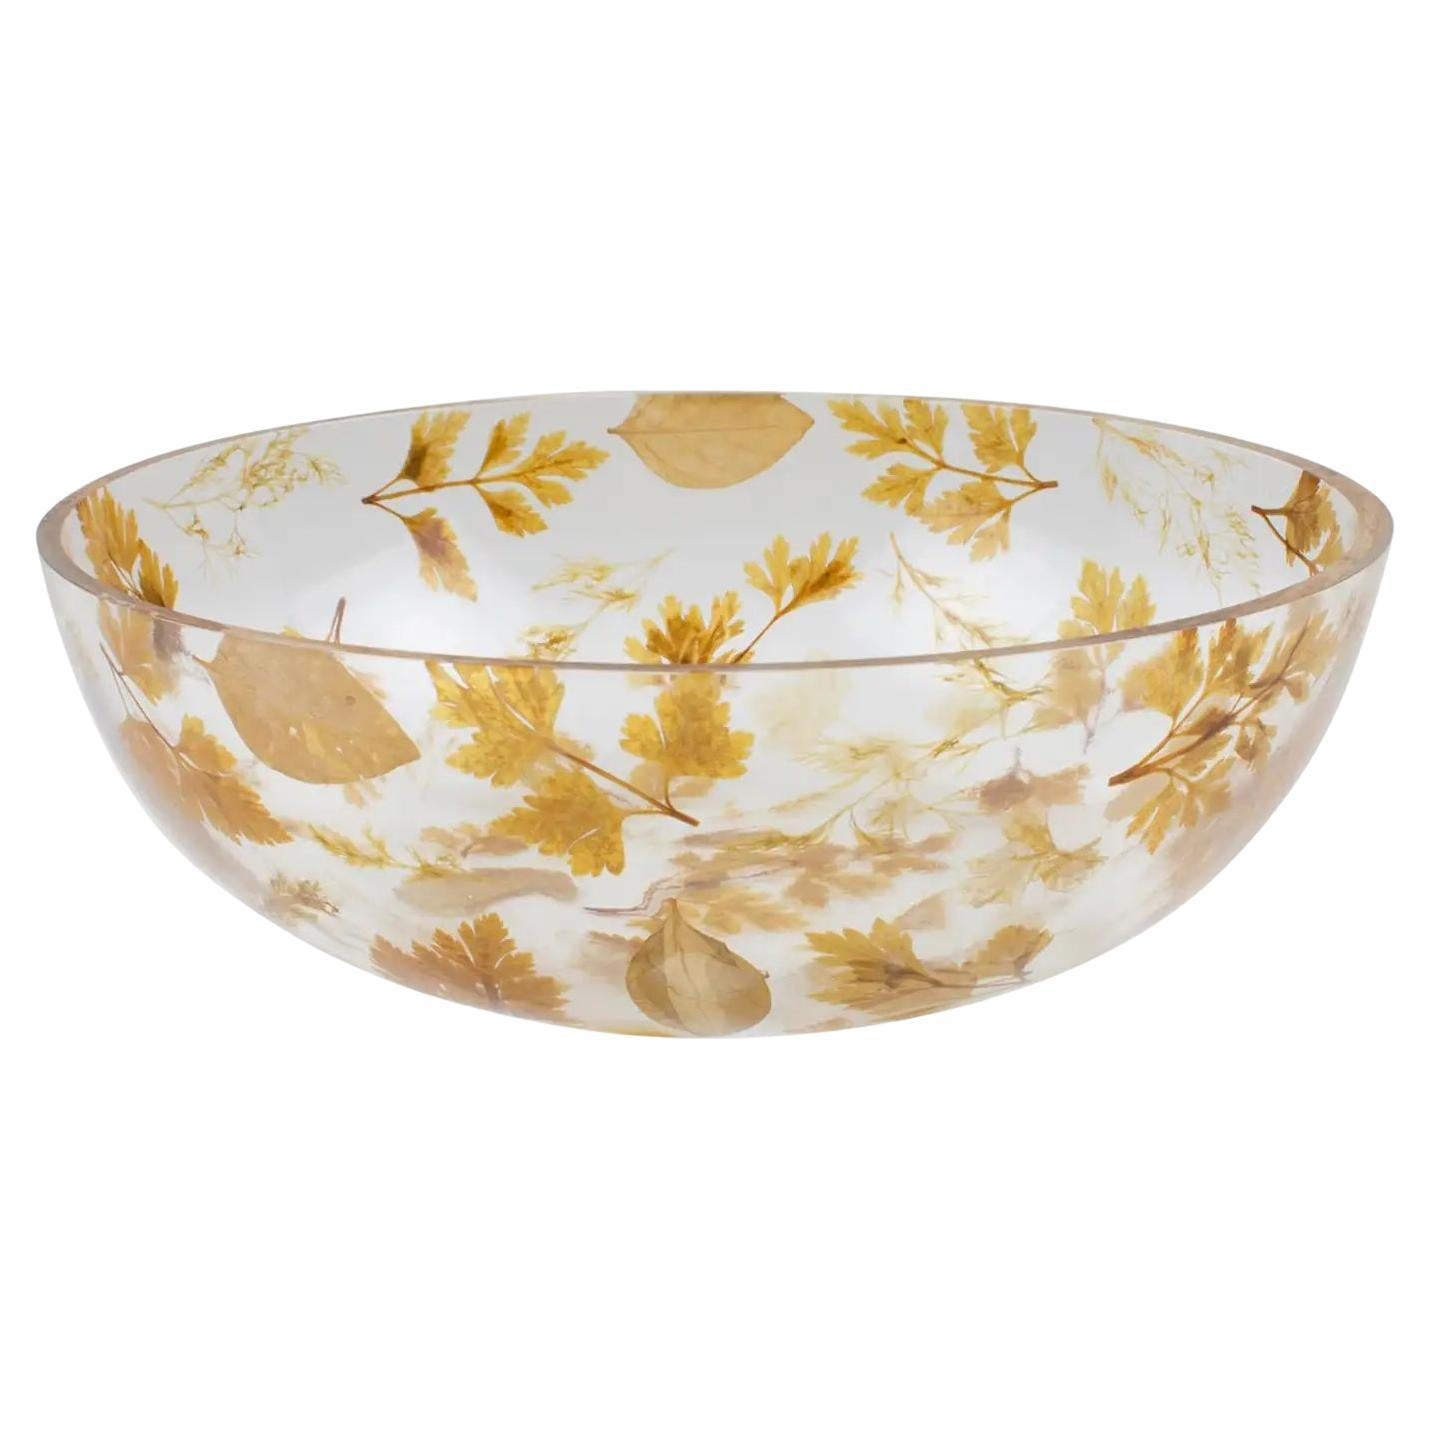 Resin Centerpiece Serving Bowl with Leaves Inclusions, Italy 1970s For Sale